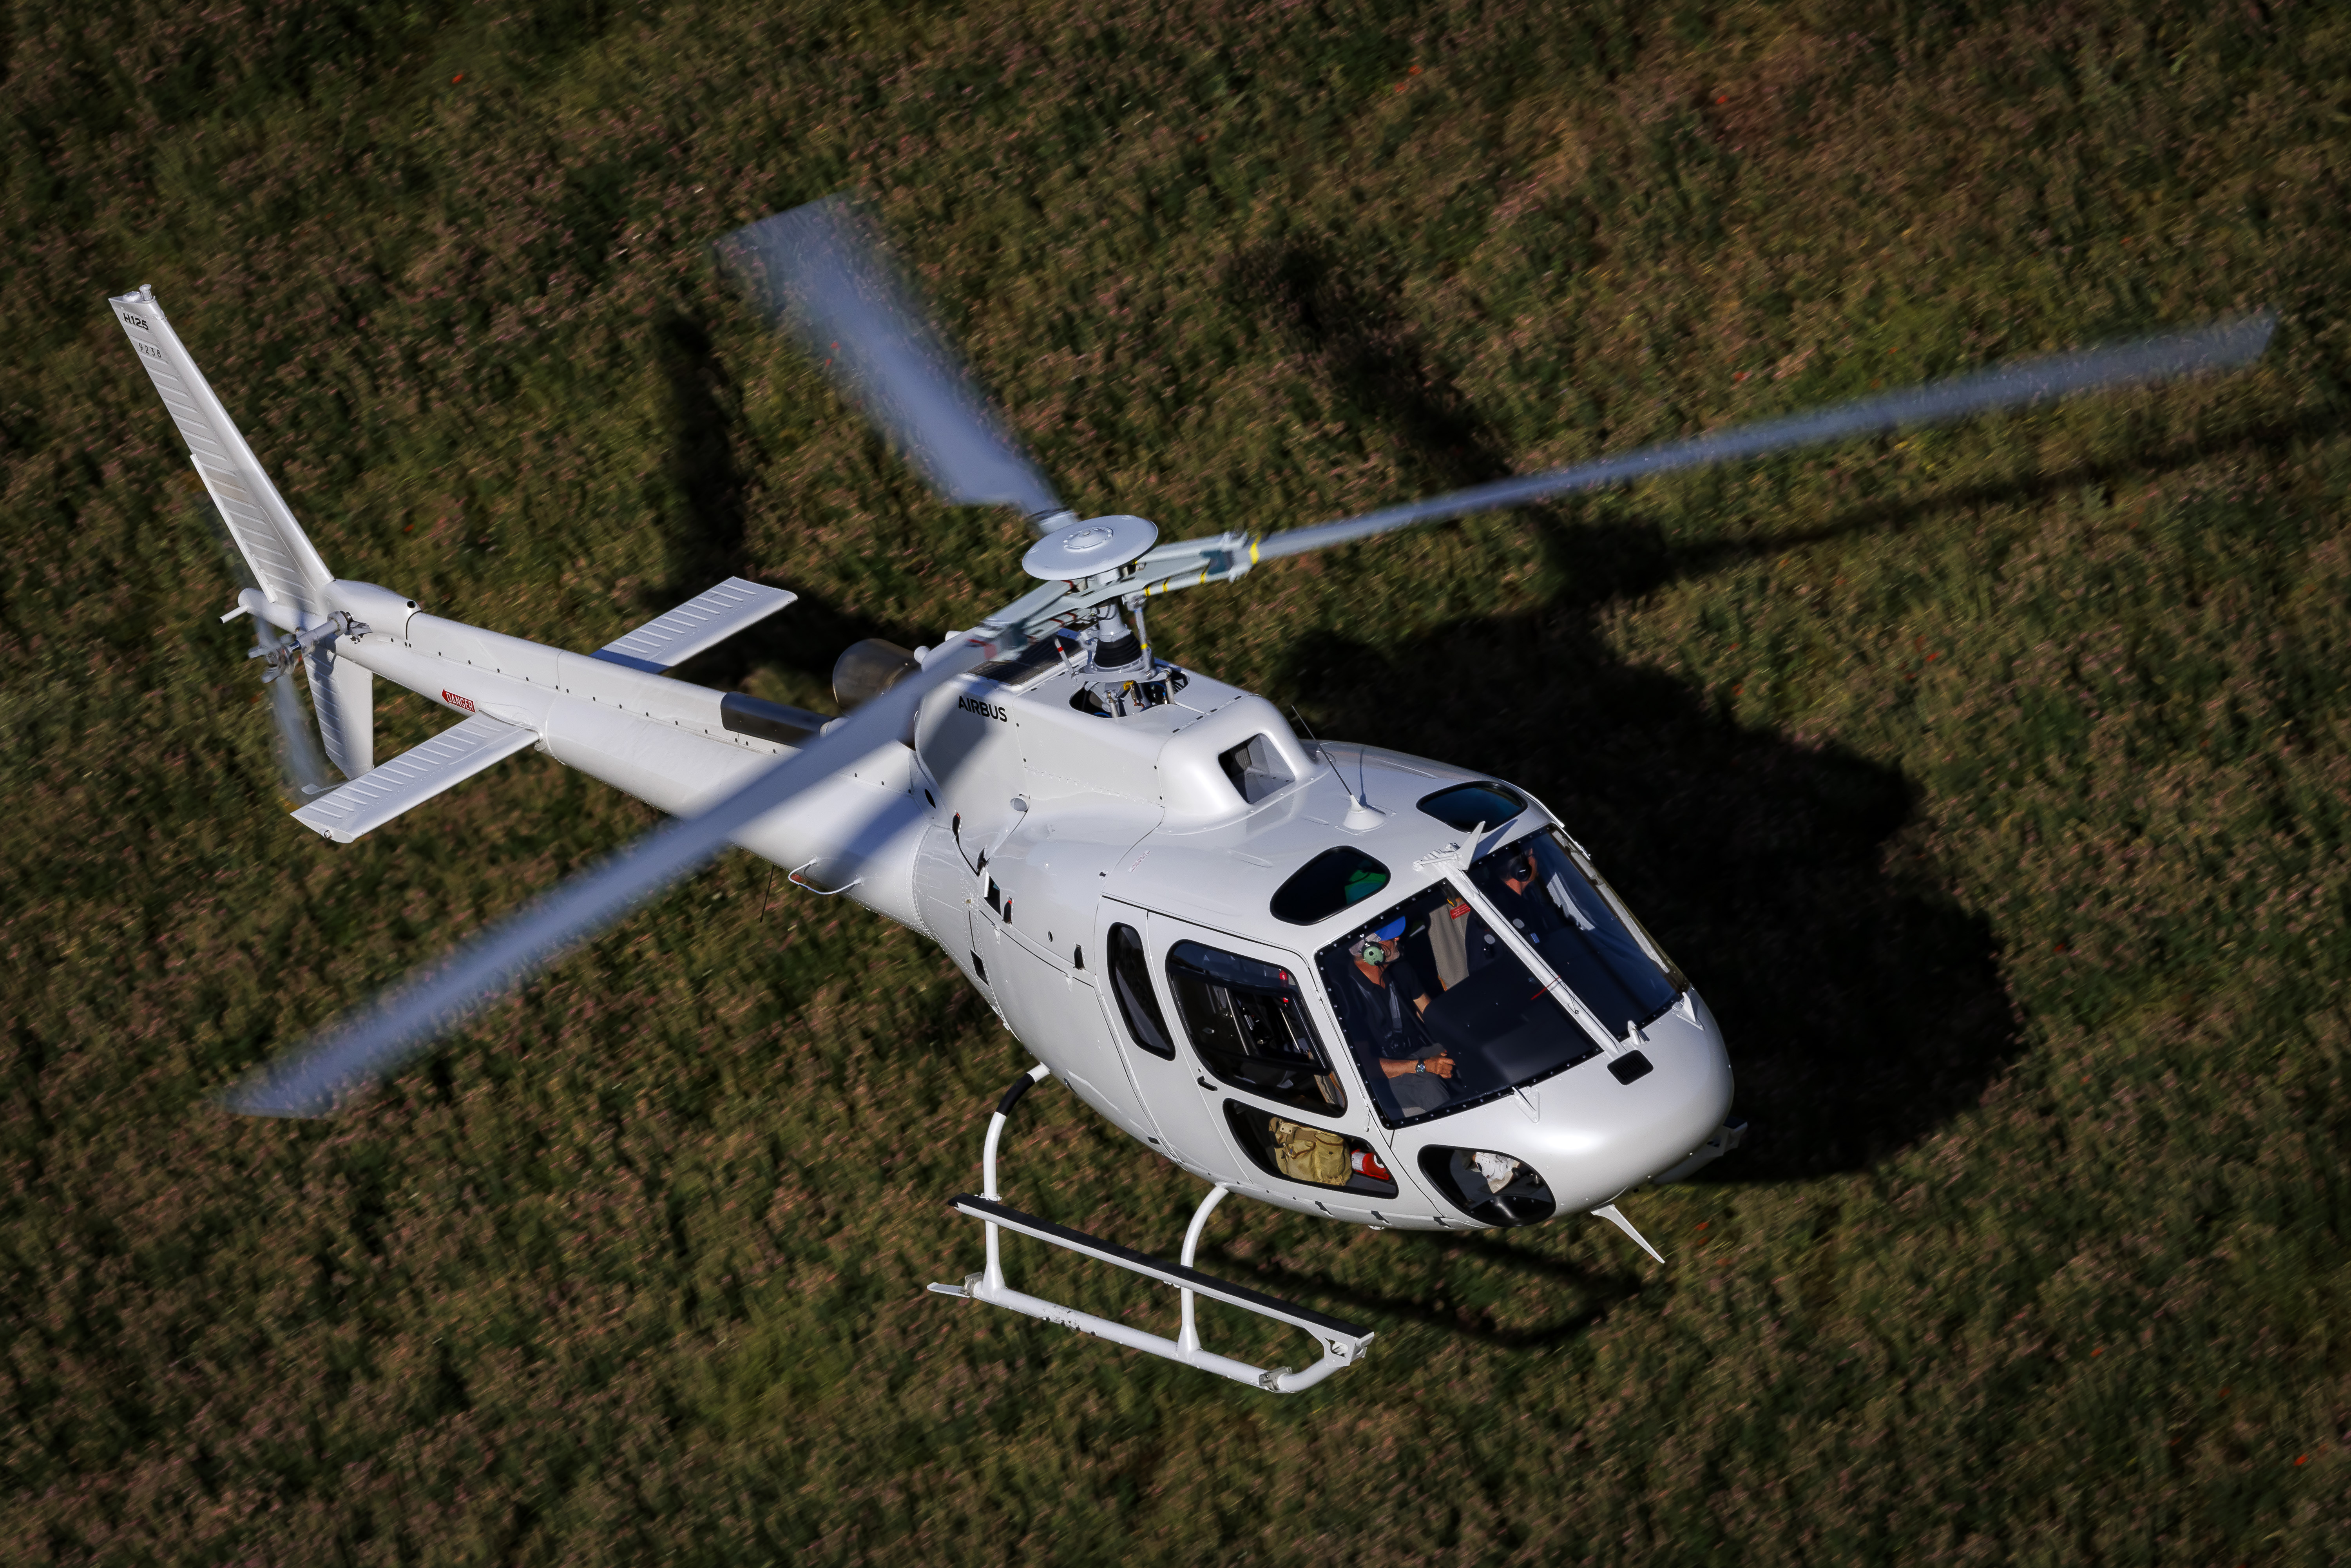 EuroSafety adds H125 dual hydraulic recurrent training to online syllabus